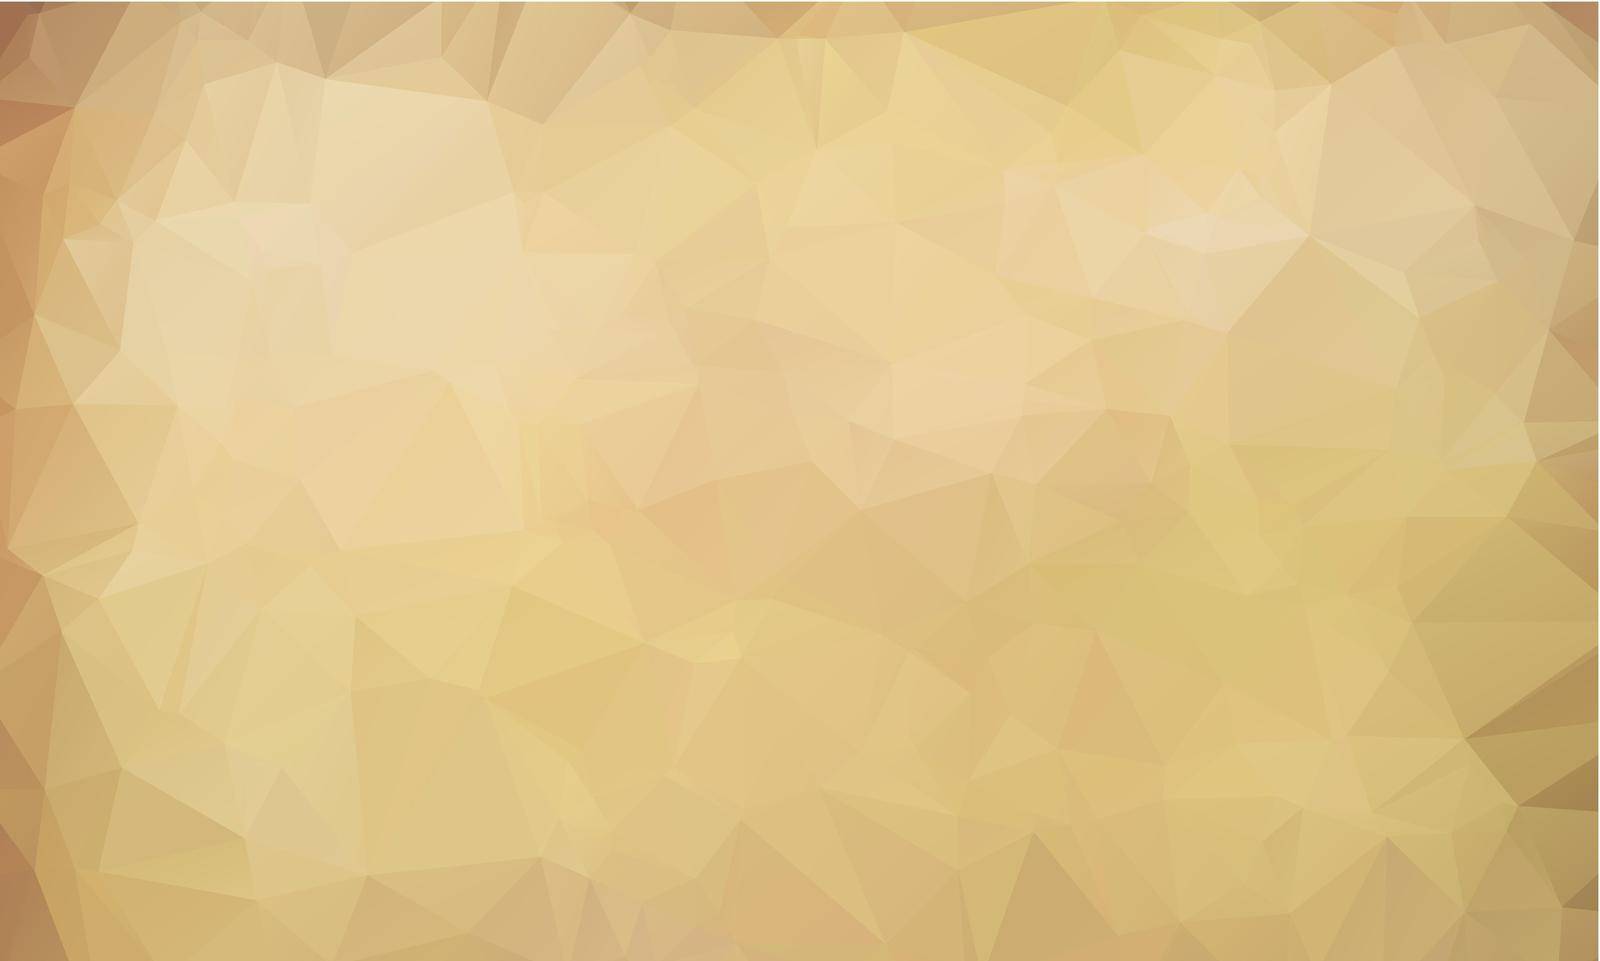 vector abstract textured polygonal background. Blurry triangle design. Pattern can be used for background.